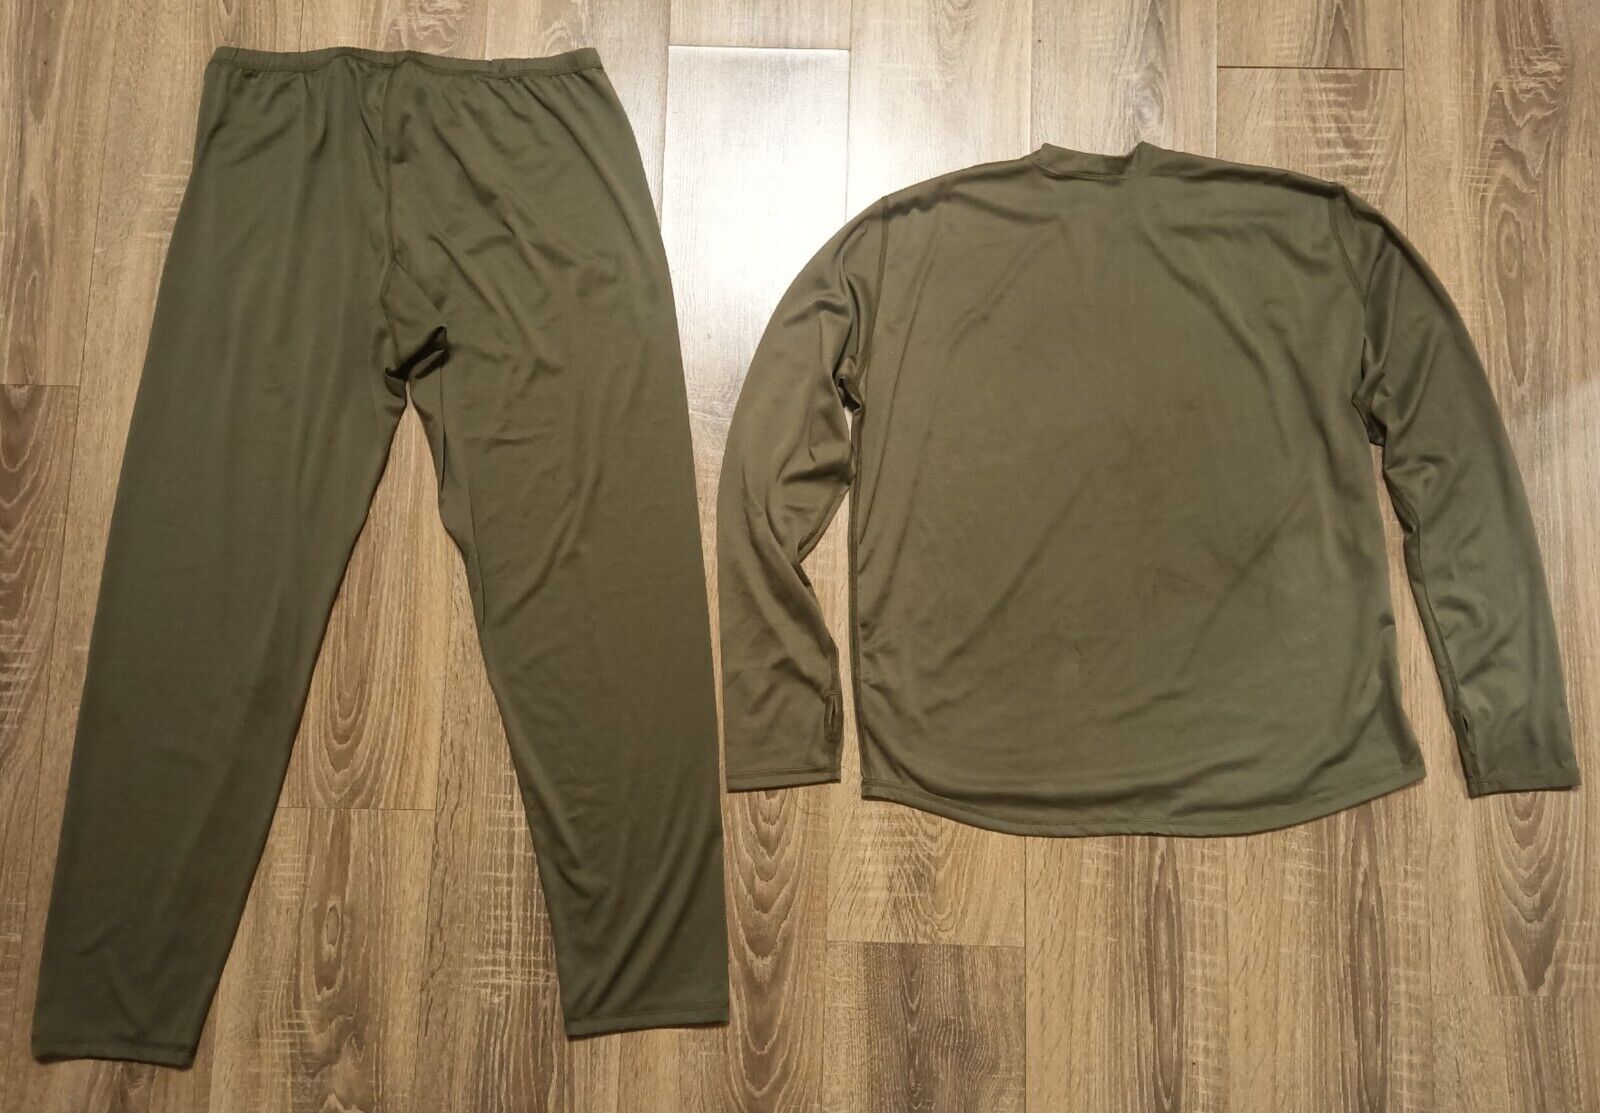 Ukraine 2022 - thermal underwear of the Russian army /VKPO/ size 56-58/3-4 (P)